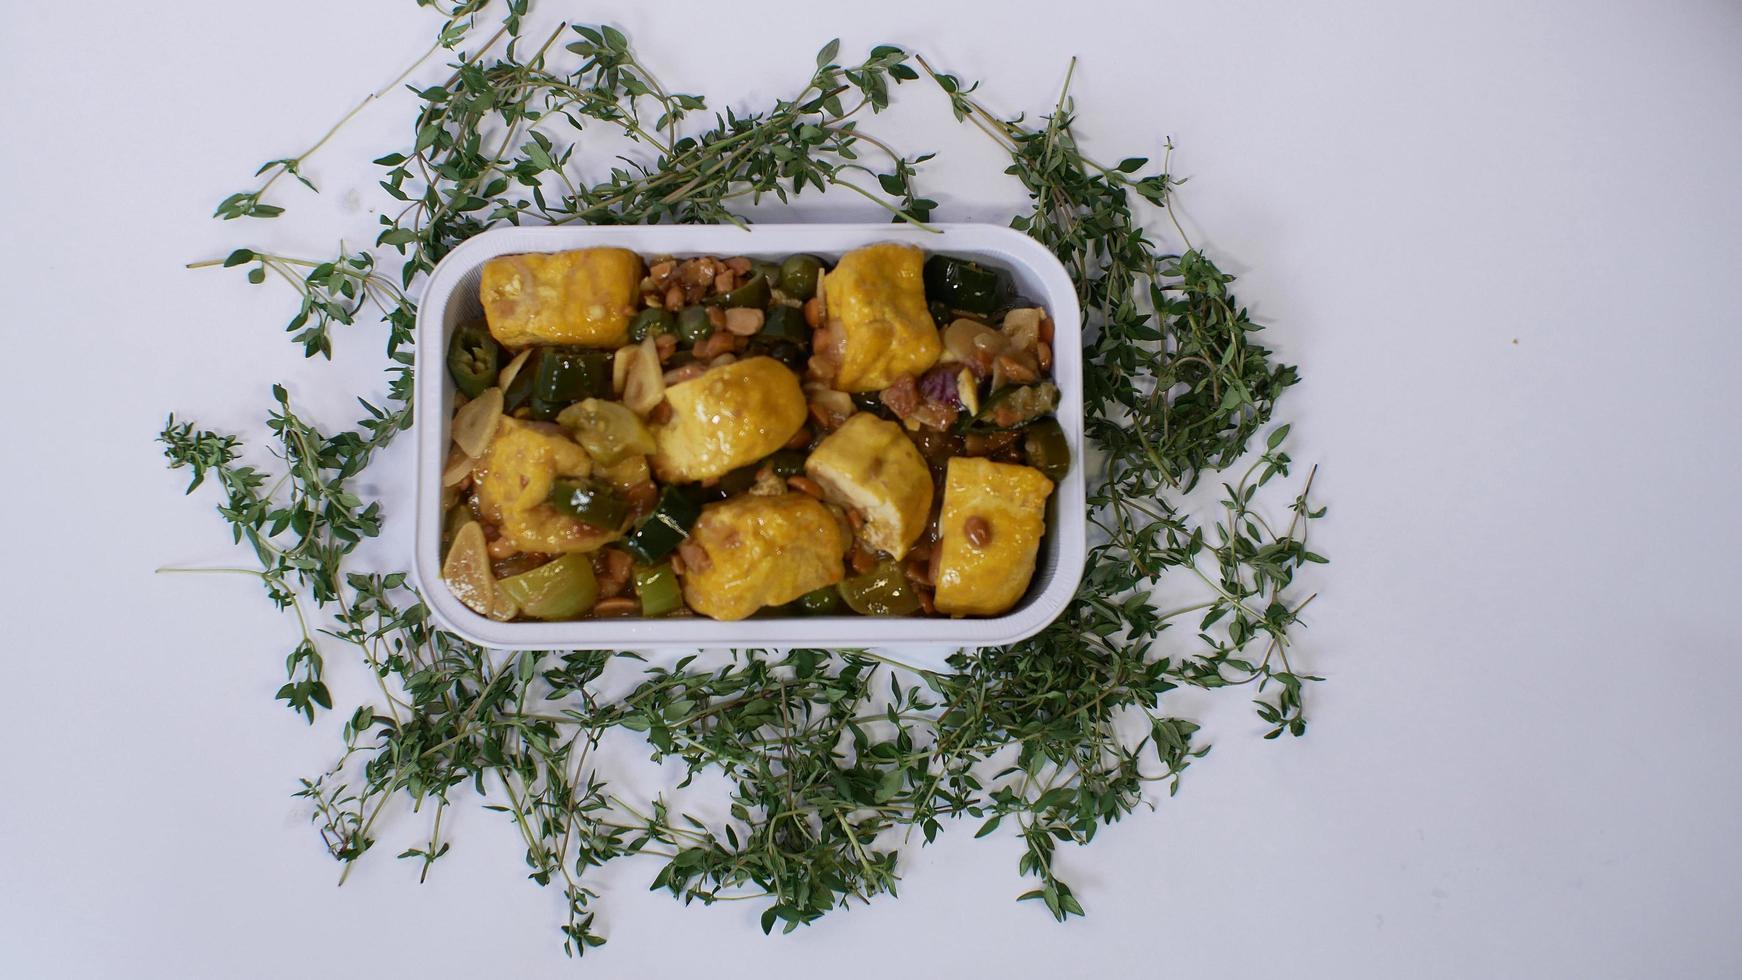 Vegetable tofu with yellow spices Indonesian food served in an aluminum holder with a white background with a few green leaves around it photo